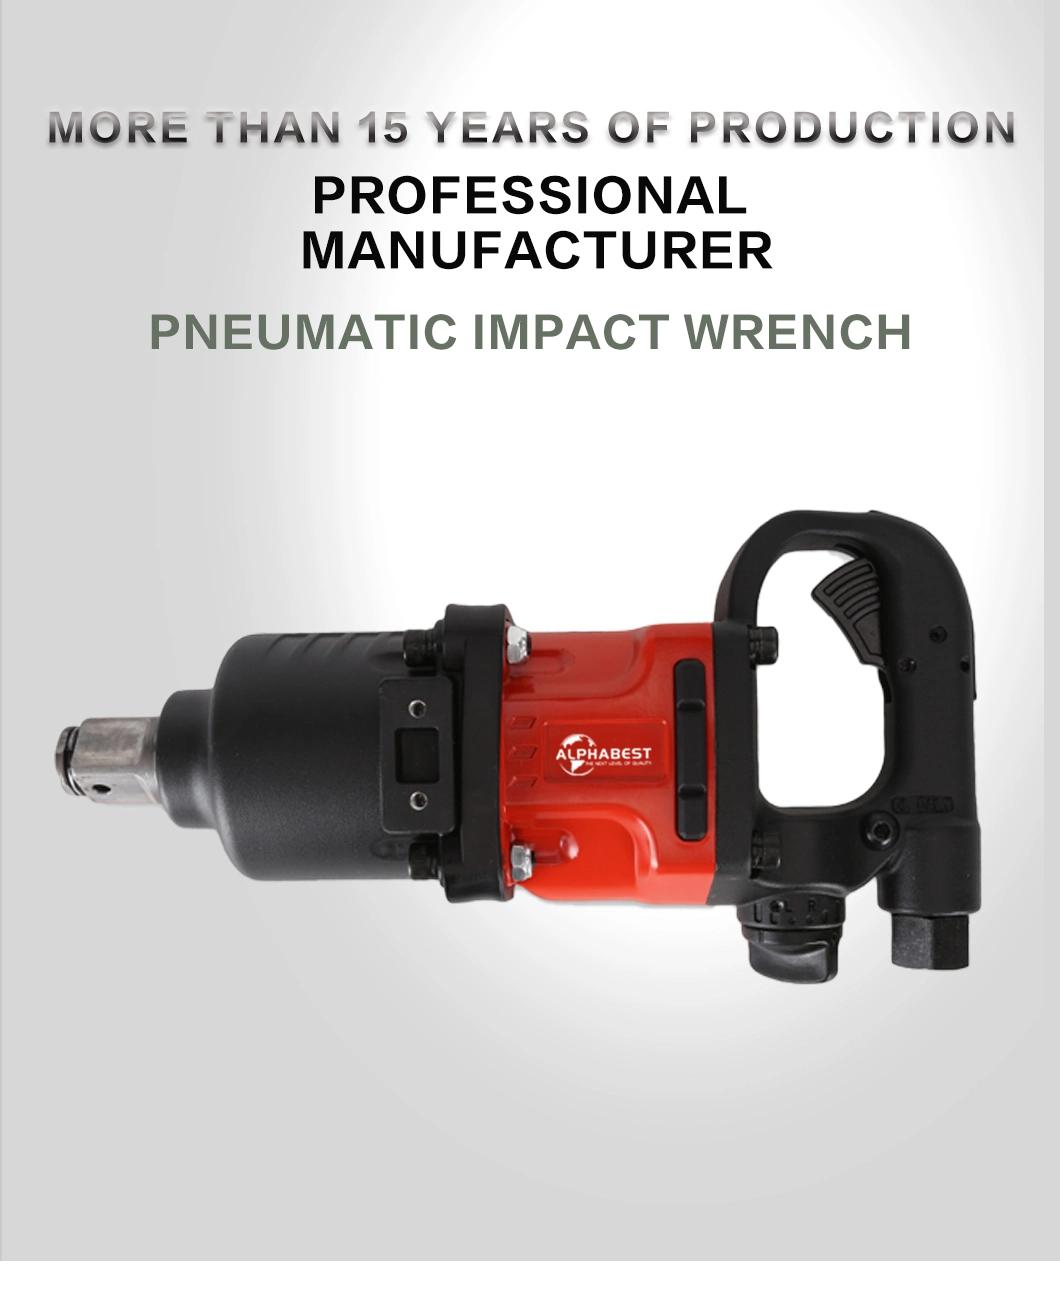 1" High Torque Type Repair Tools Air-Powered Pneumatic Impact Wrench at-D6120